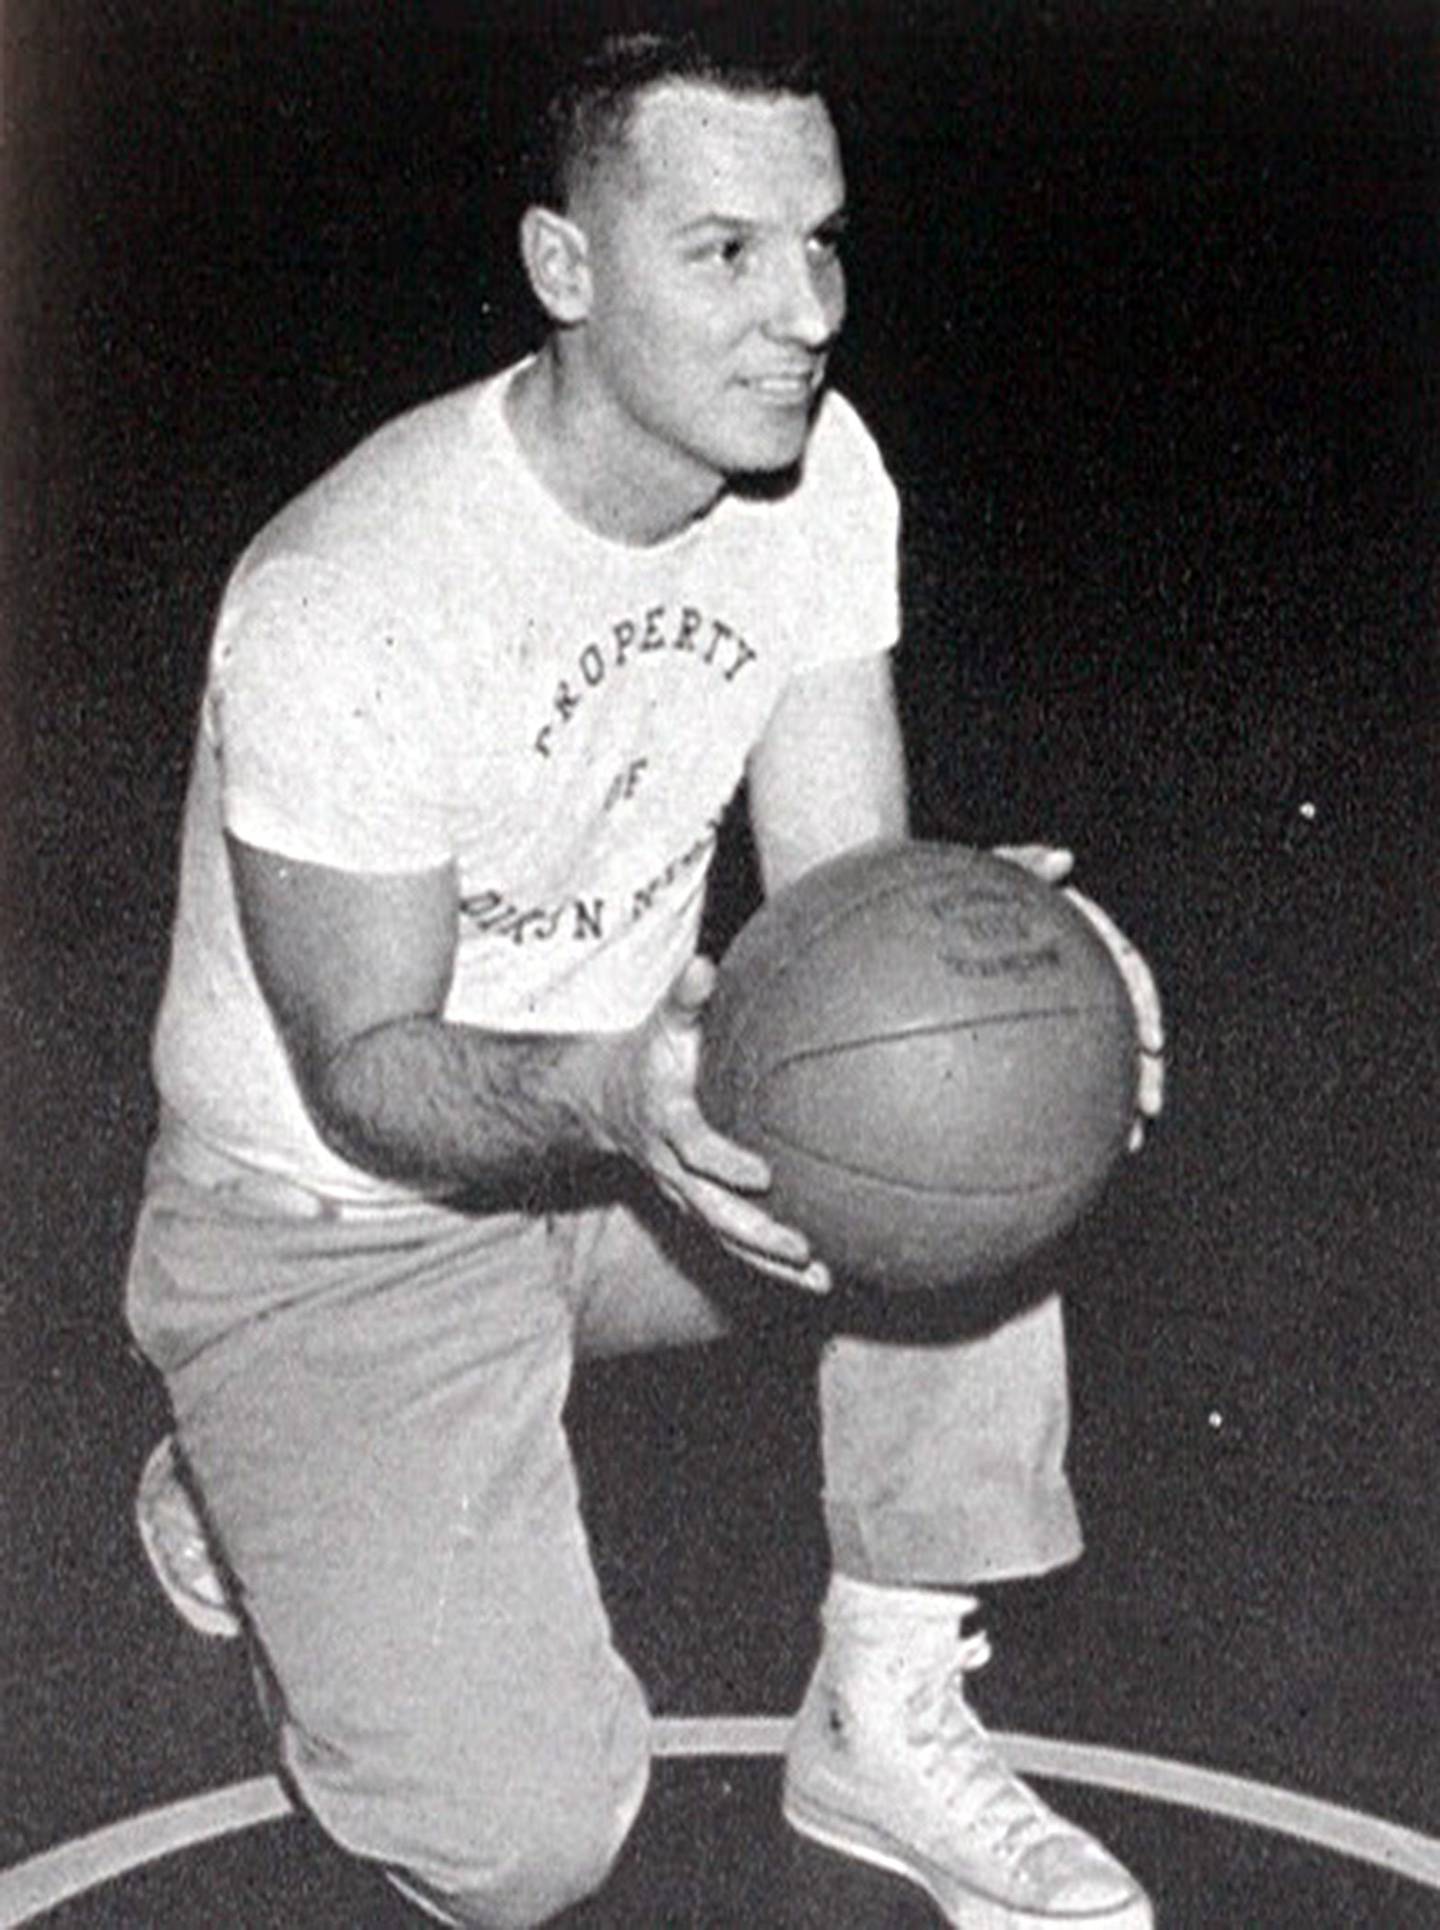 Lyle Bogott, who was Dixon High School boys basketball coach during the 1950s, appears in a file photo from that period.